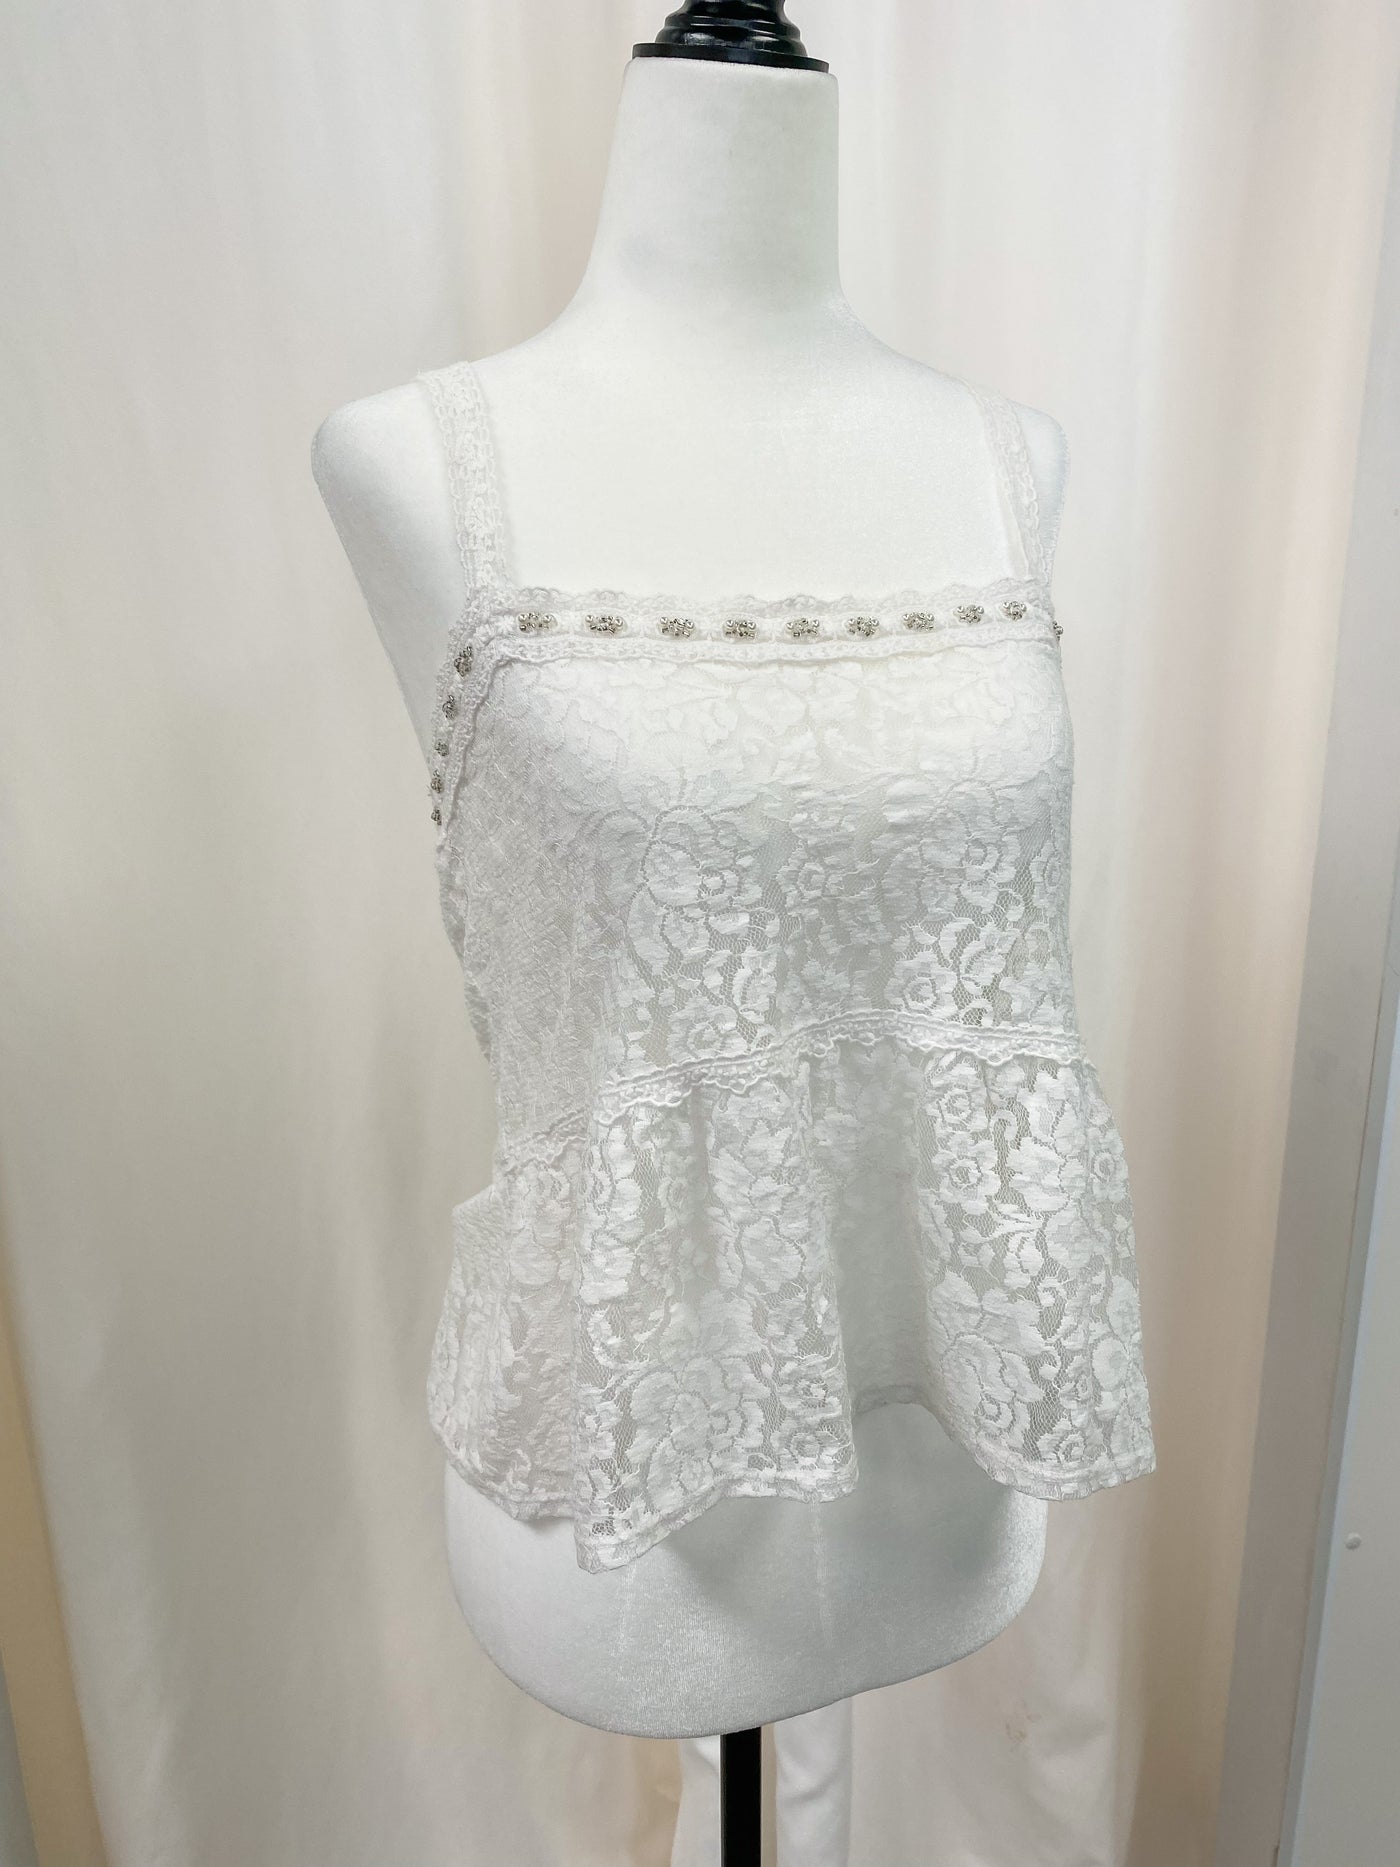 Abercrombie & Fitch Lace Tank